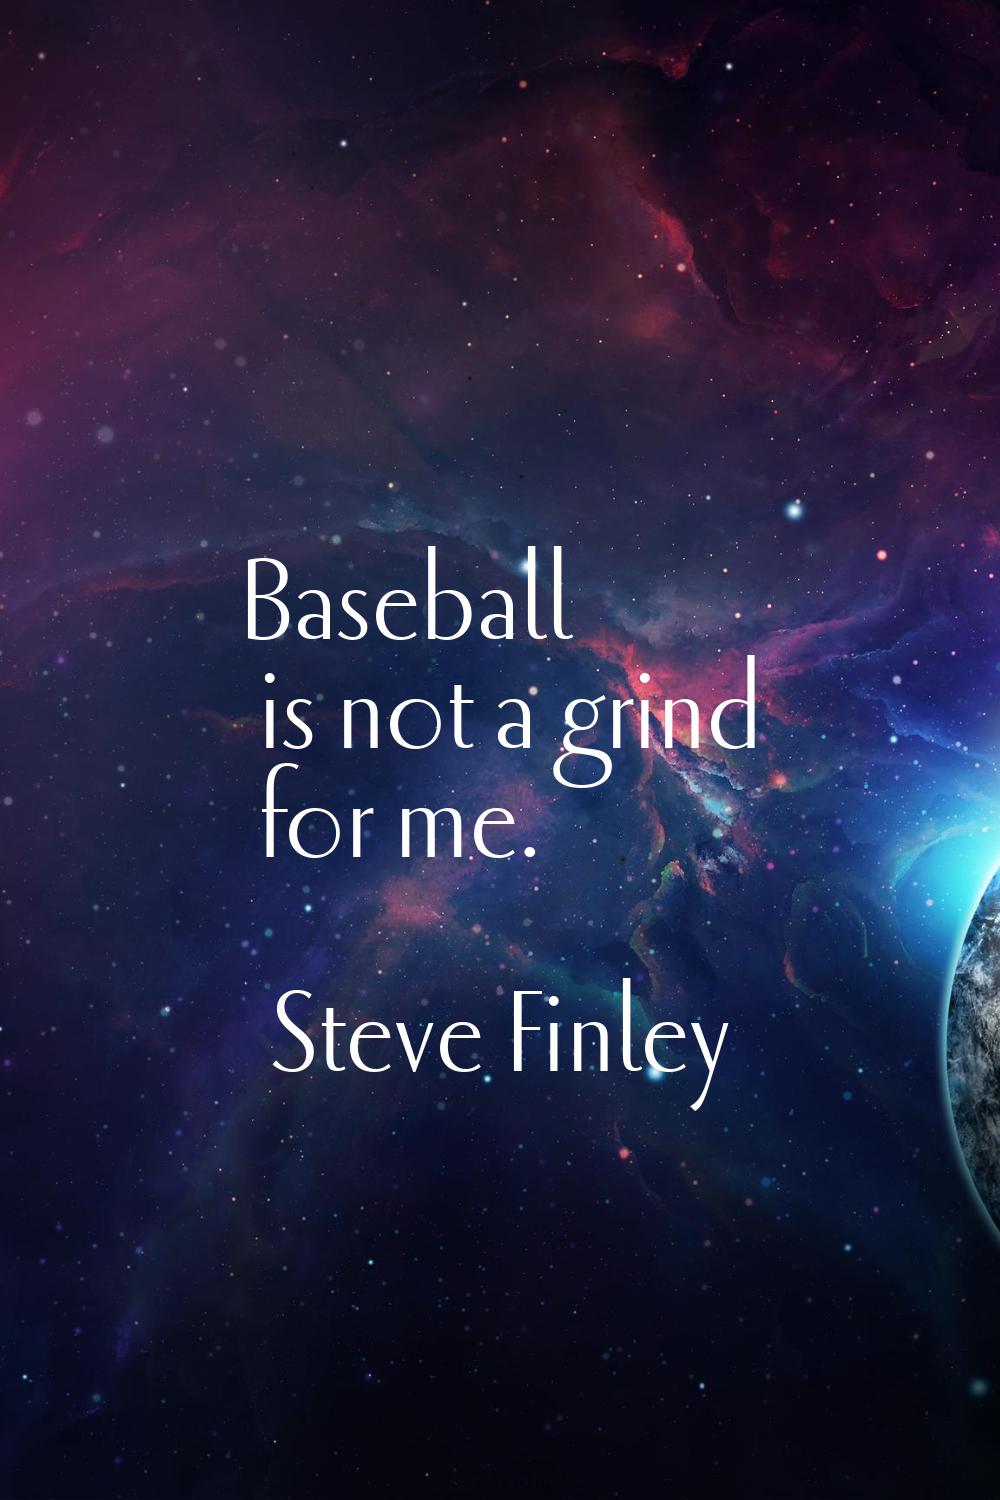 Baseball is not a grind for me.